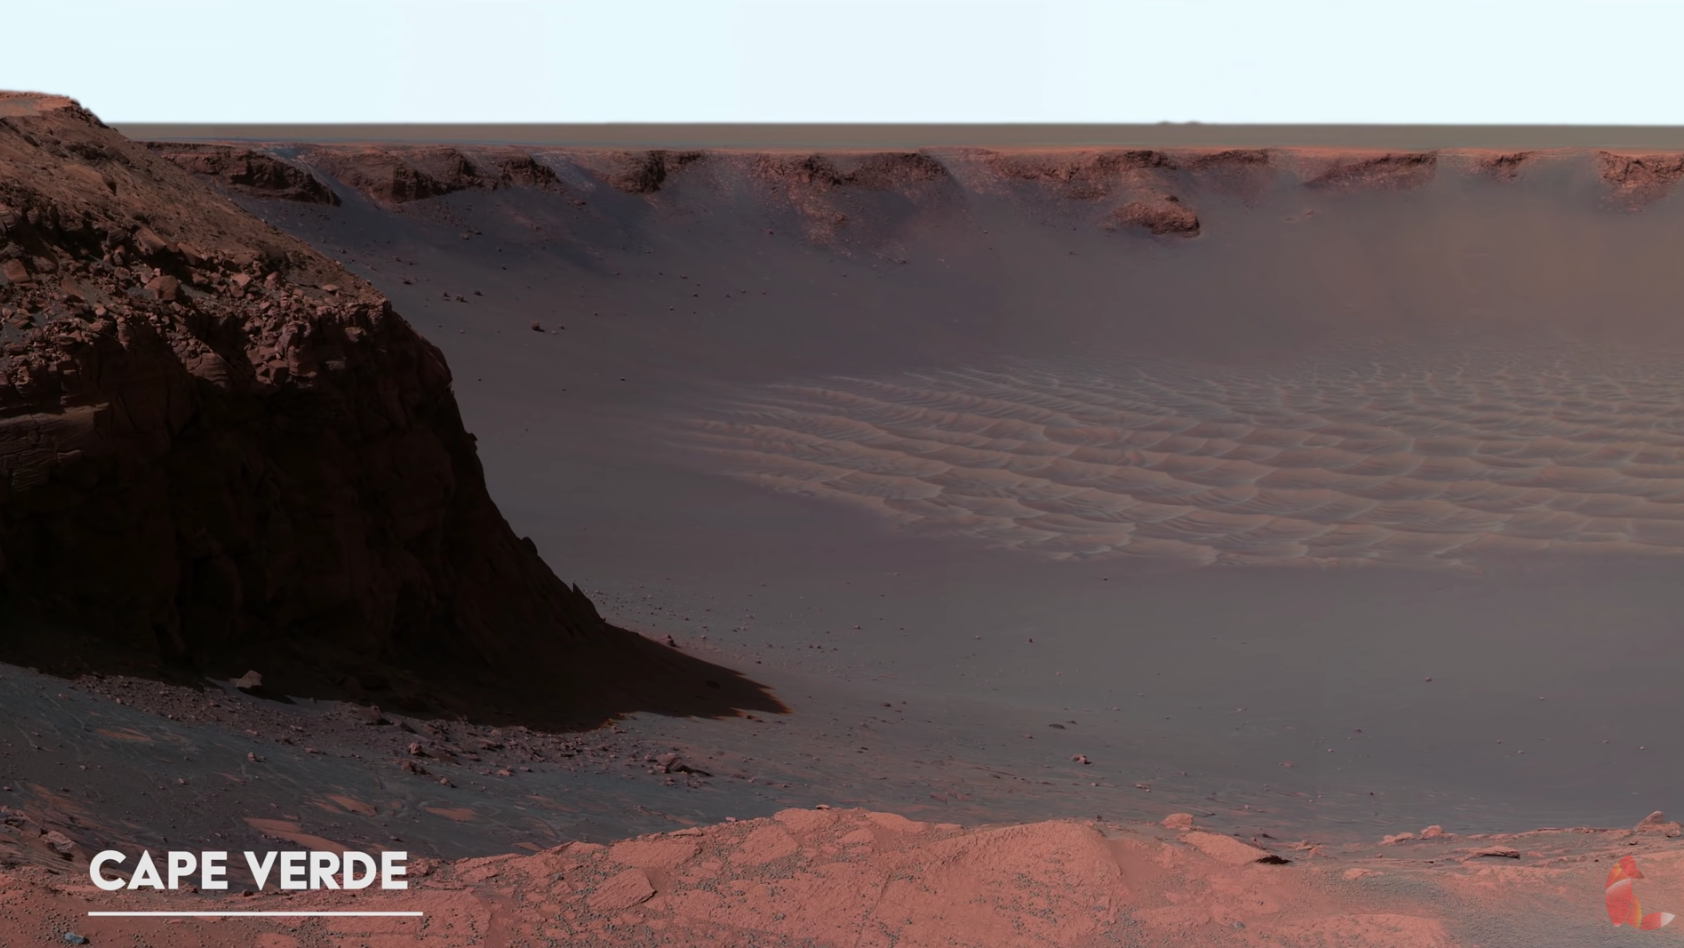 Image 4k Mars Mars 4k Images Show Surface Of The Red Planet In Space